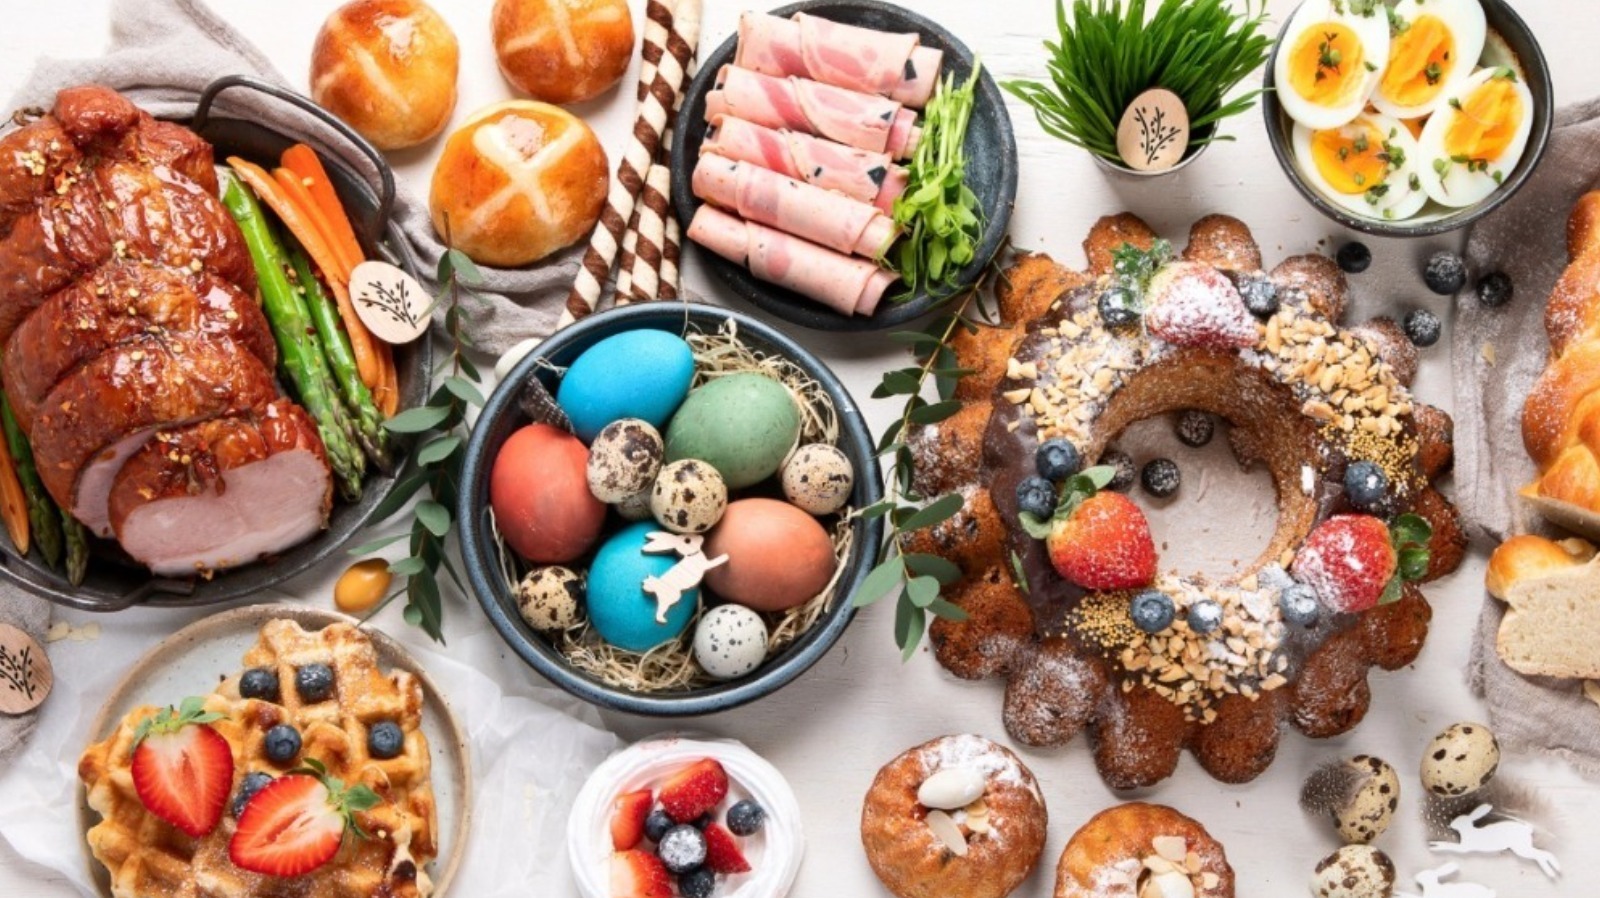 14 Easter Food Traditions From Around The World